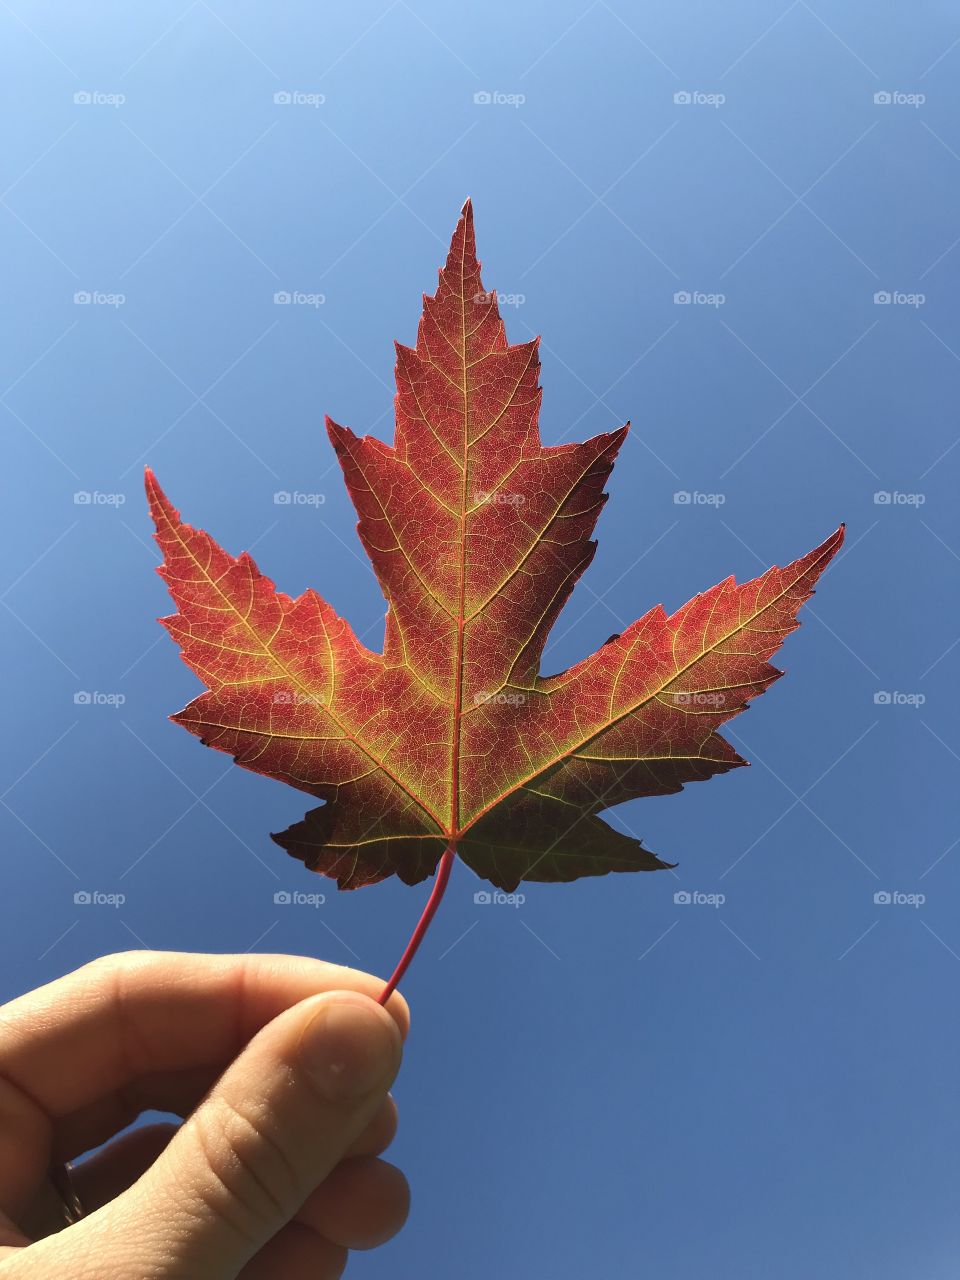 Bright red maple leaf held up against a blue sky